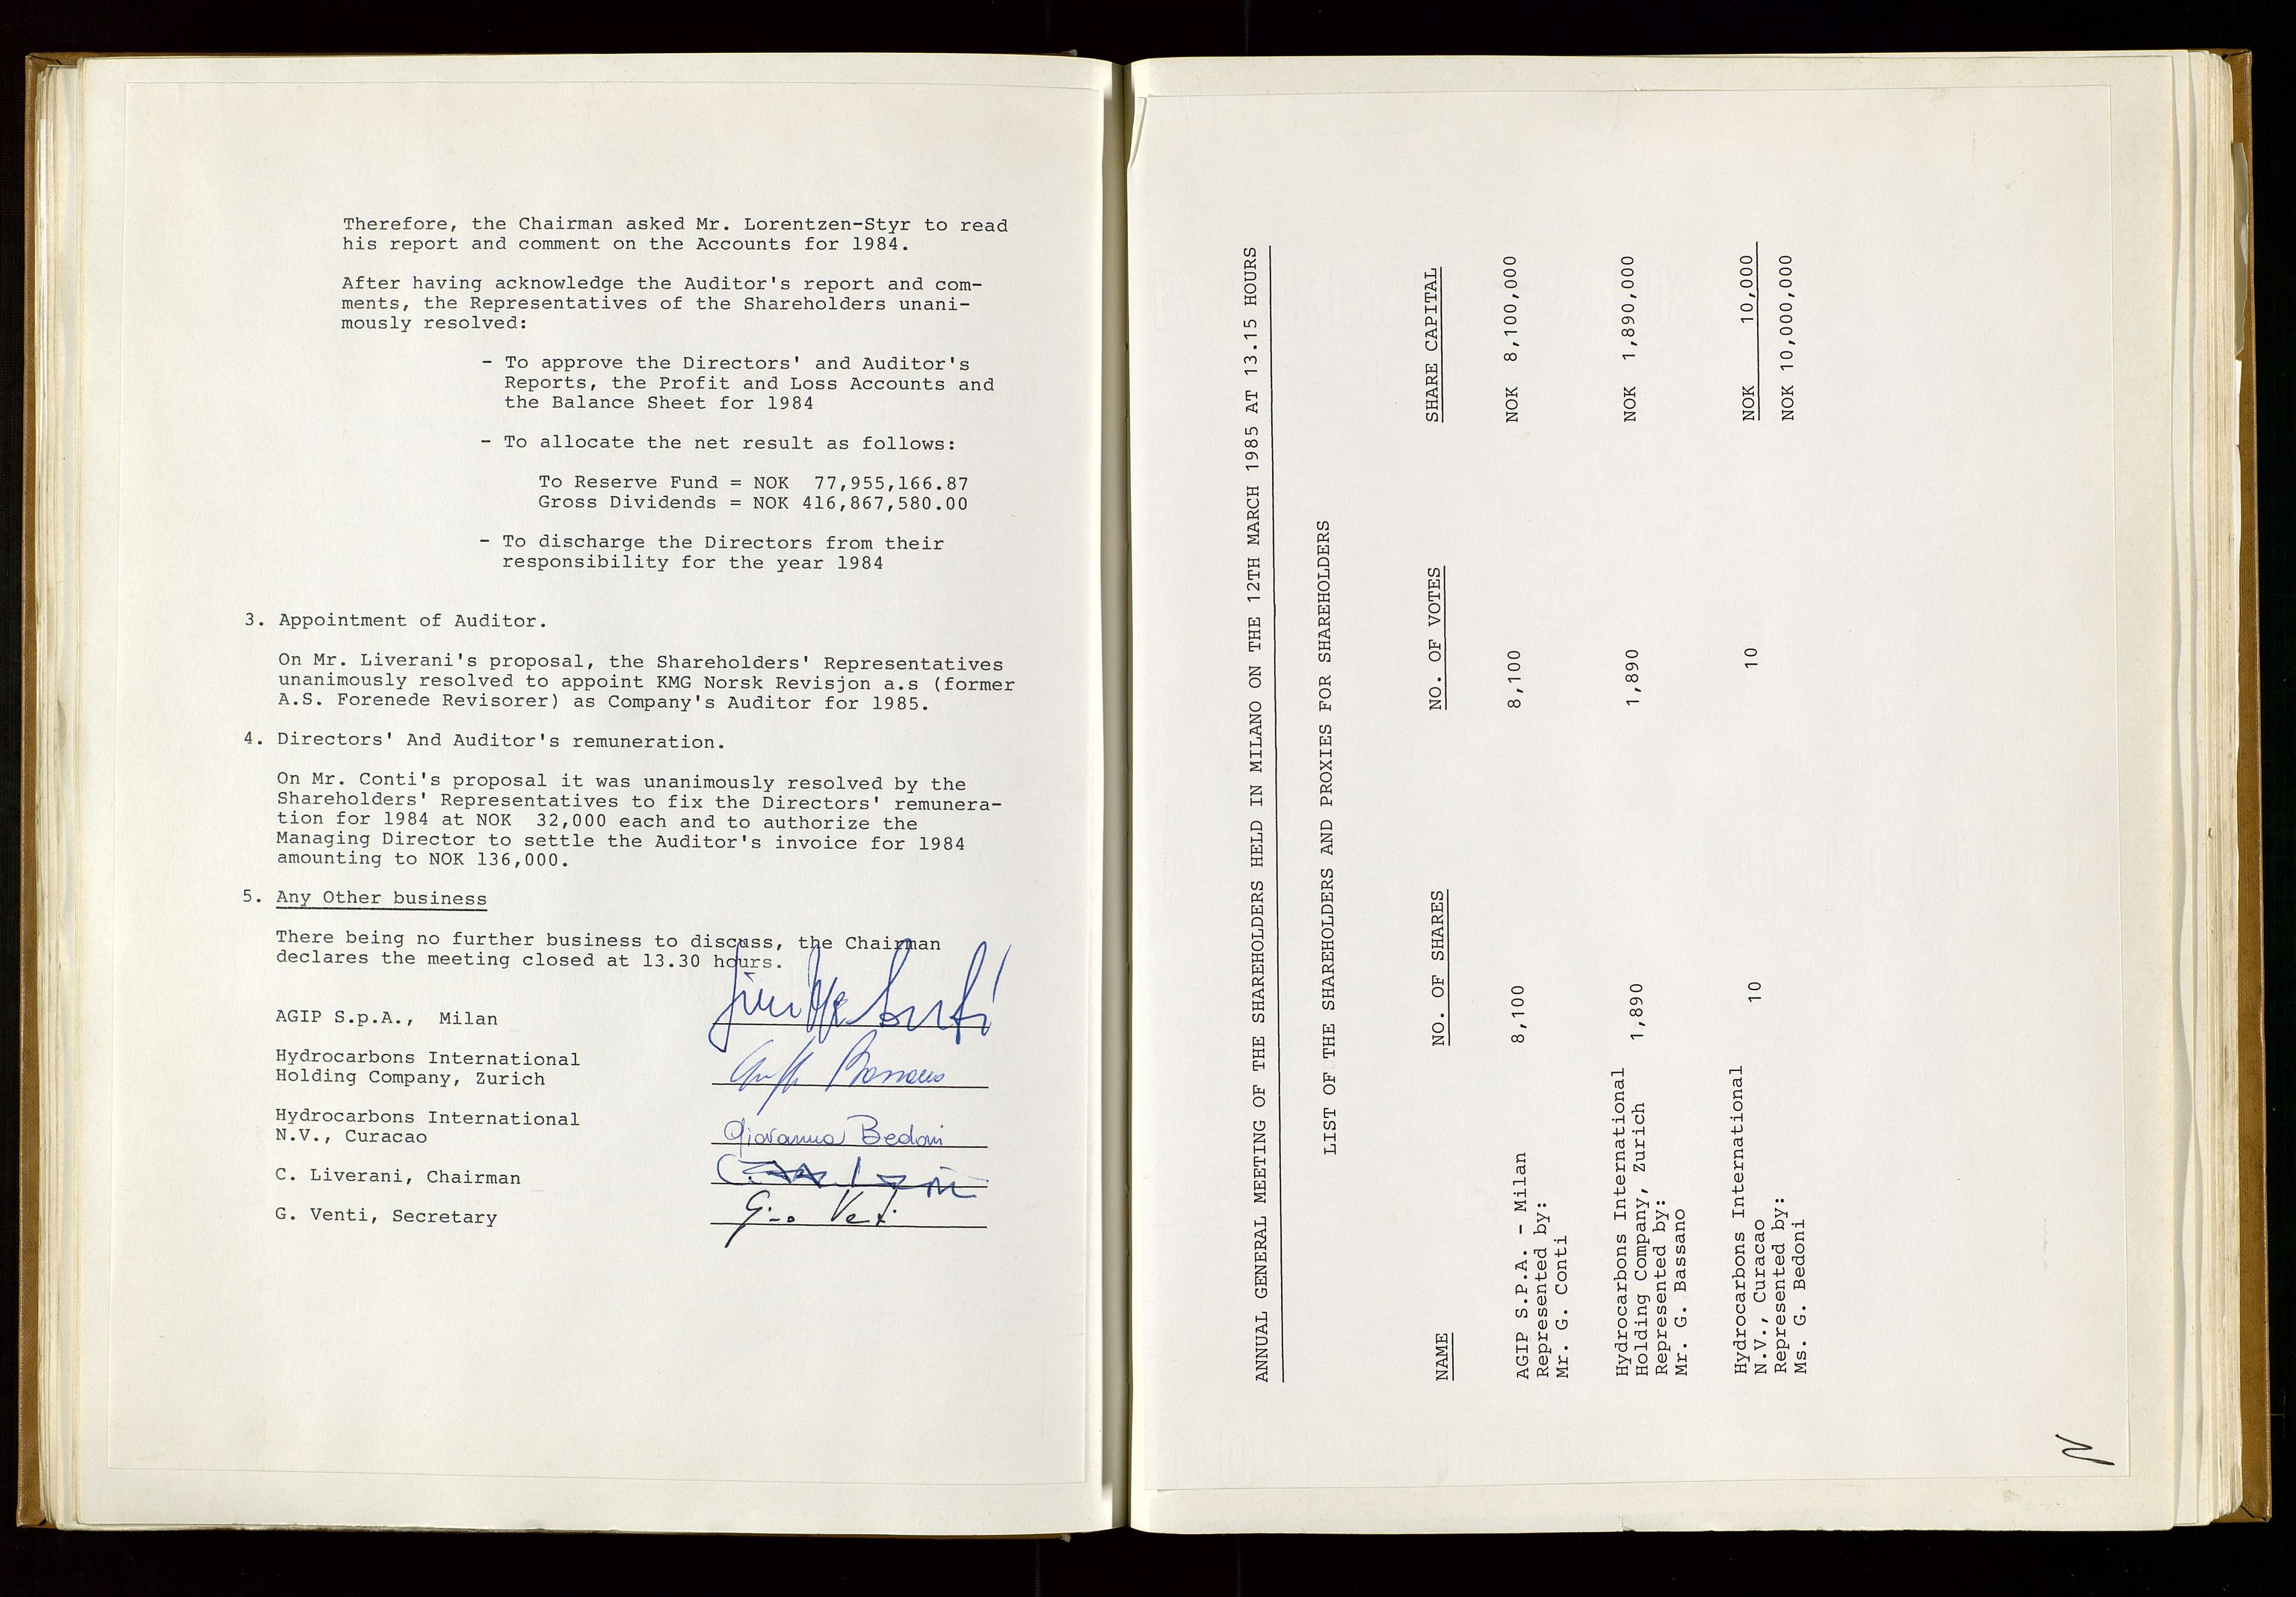 Pa 1583 - Norsk Agip AS, SAST/A-102138/A/Aa/L0001: General assembly and Board of Directors meeting minutes, 1965-1990